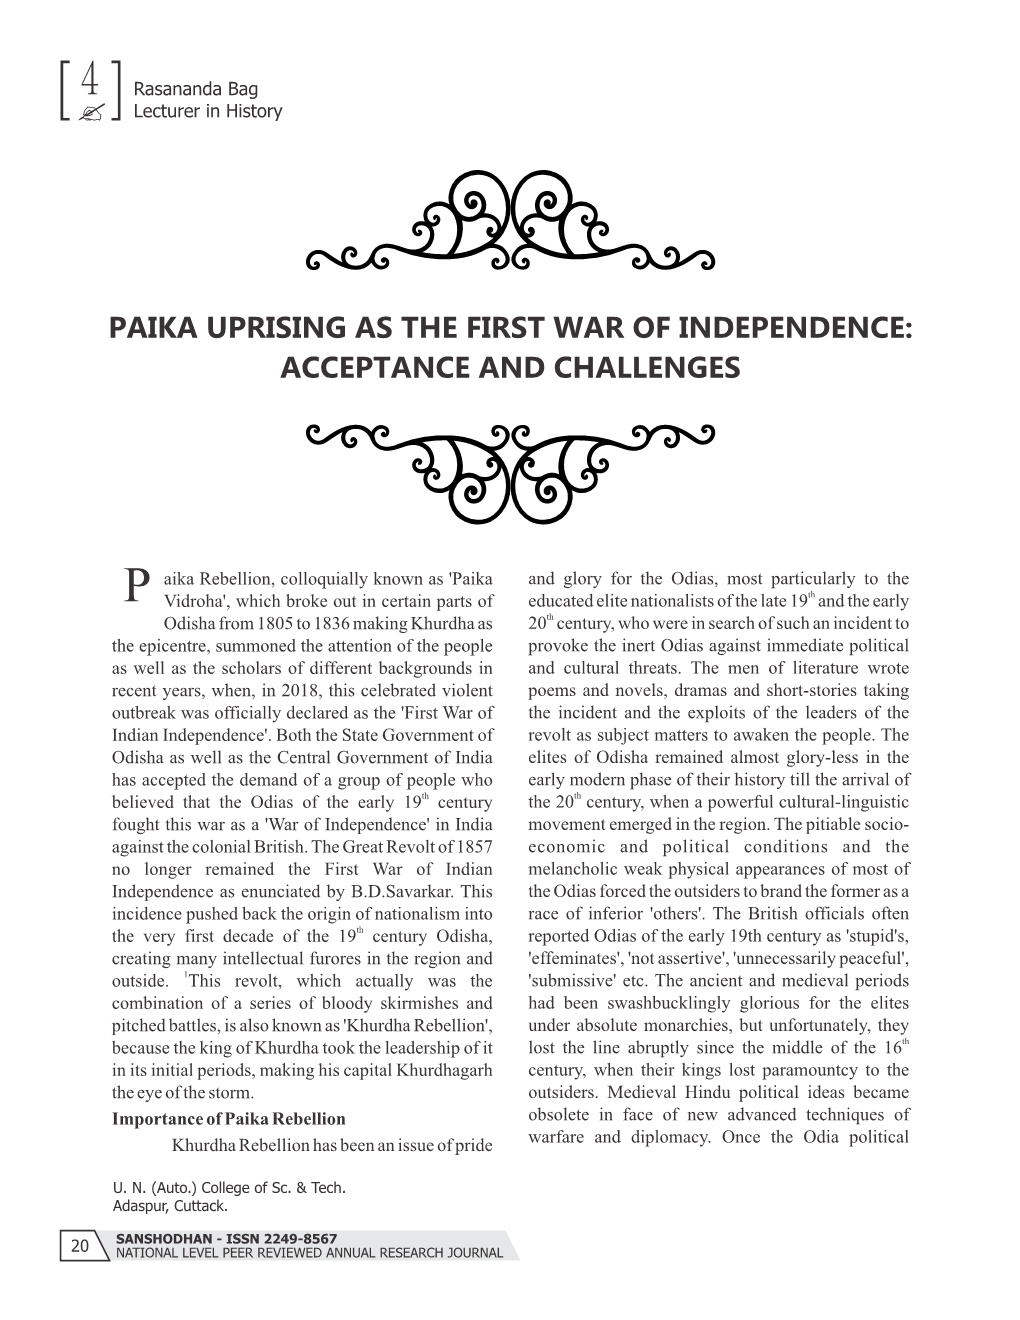 Paika Uprising As the First War of Independence: Acceptance and Challenges